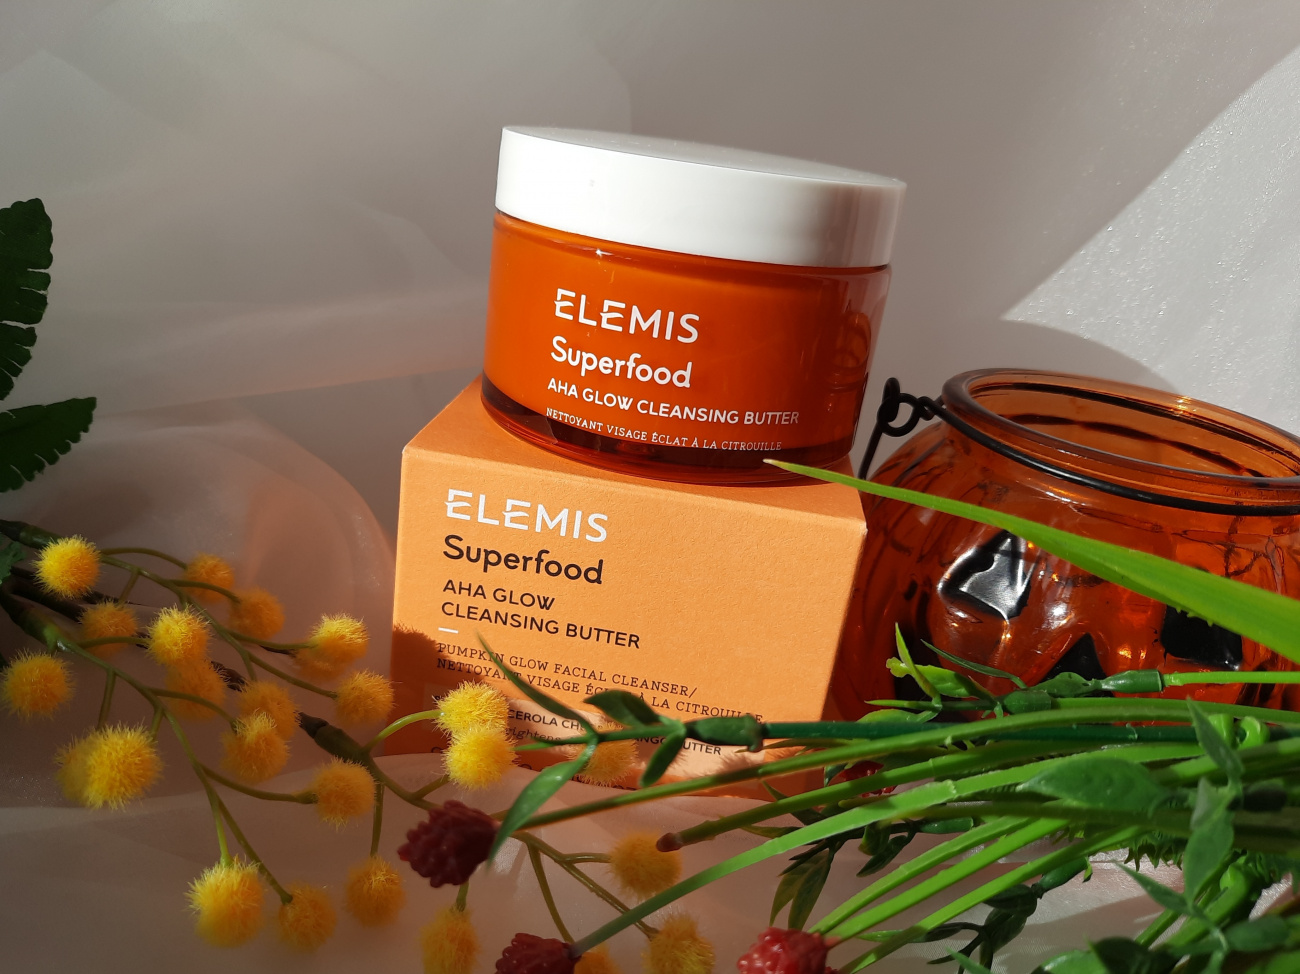 Glow clean activated. Элемис суперфуд. Элемис Glow Cleansing Butter. Элемис Superfood Glow. Elemis Superfood Aha Glow Cleansing Butter 90ml.